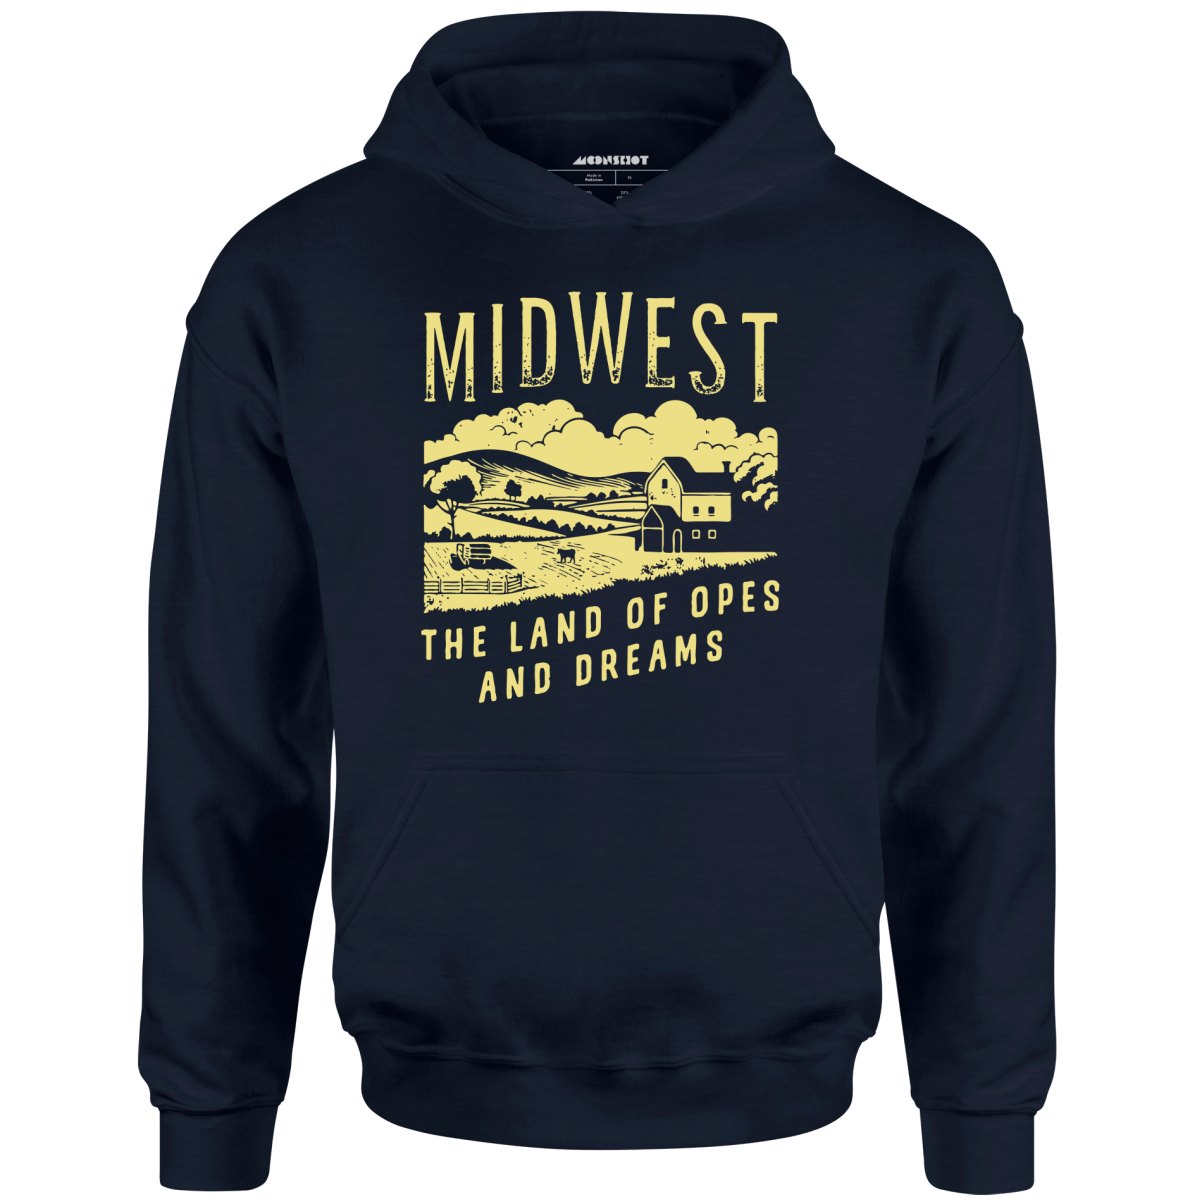 Midwest The Land of Opes and Dreams - Unisex Hoodie